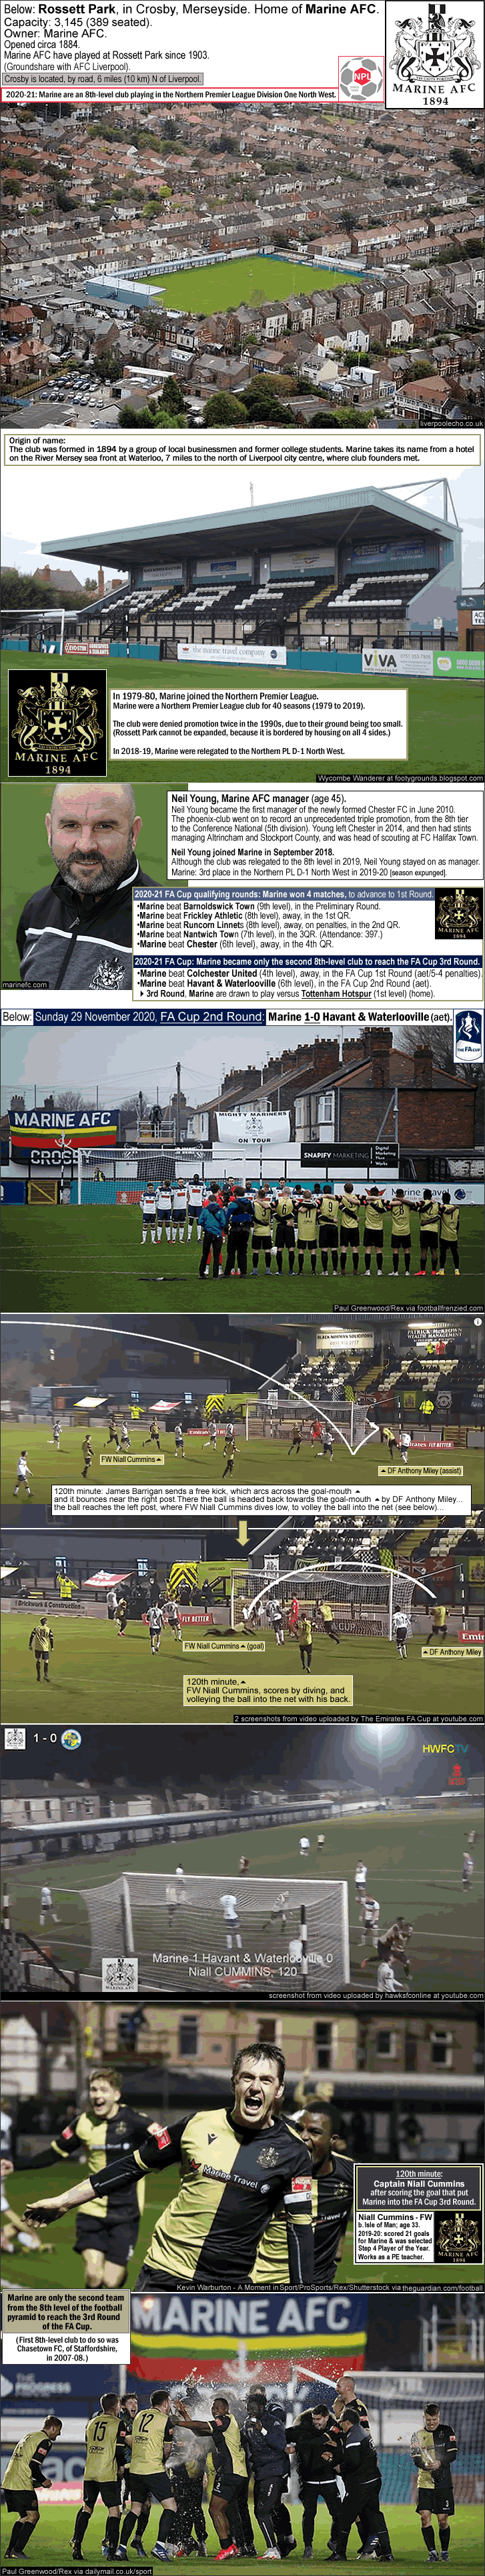 marine-afc_2020-21-fa-cup-2nd-round_win-over-havant-and-waterlooville_rossett-park_neil-young_niall-cummins_t_.gif